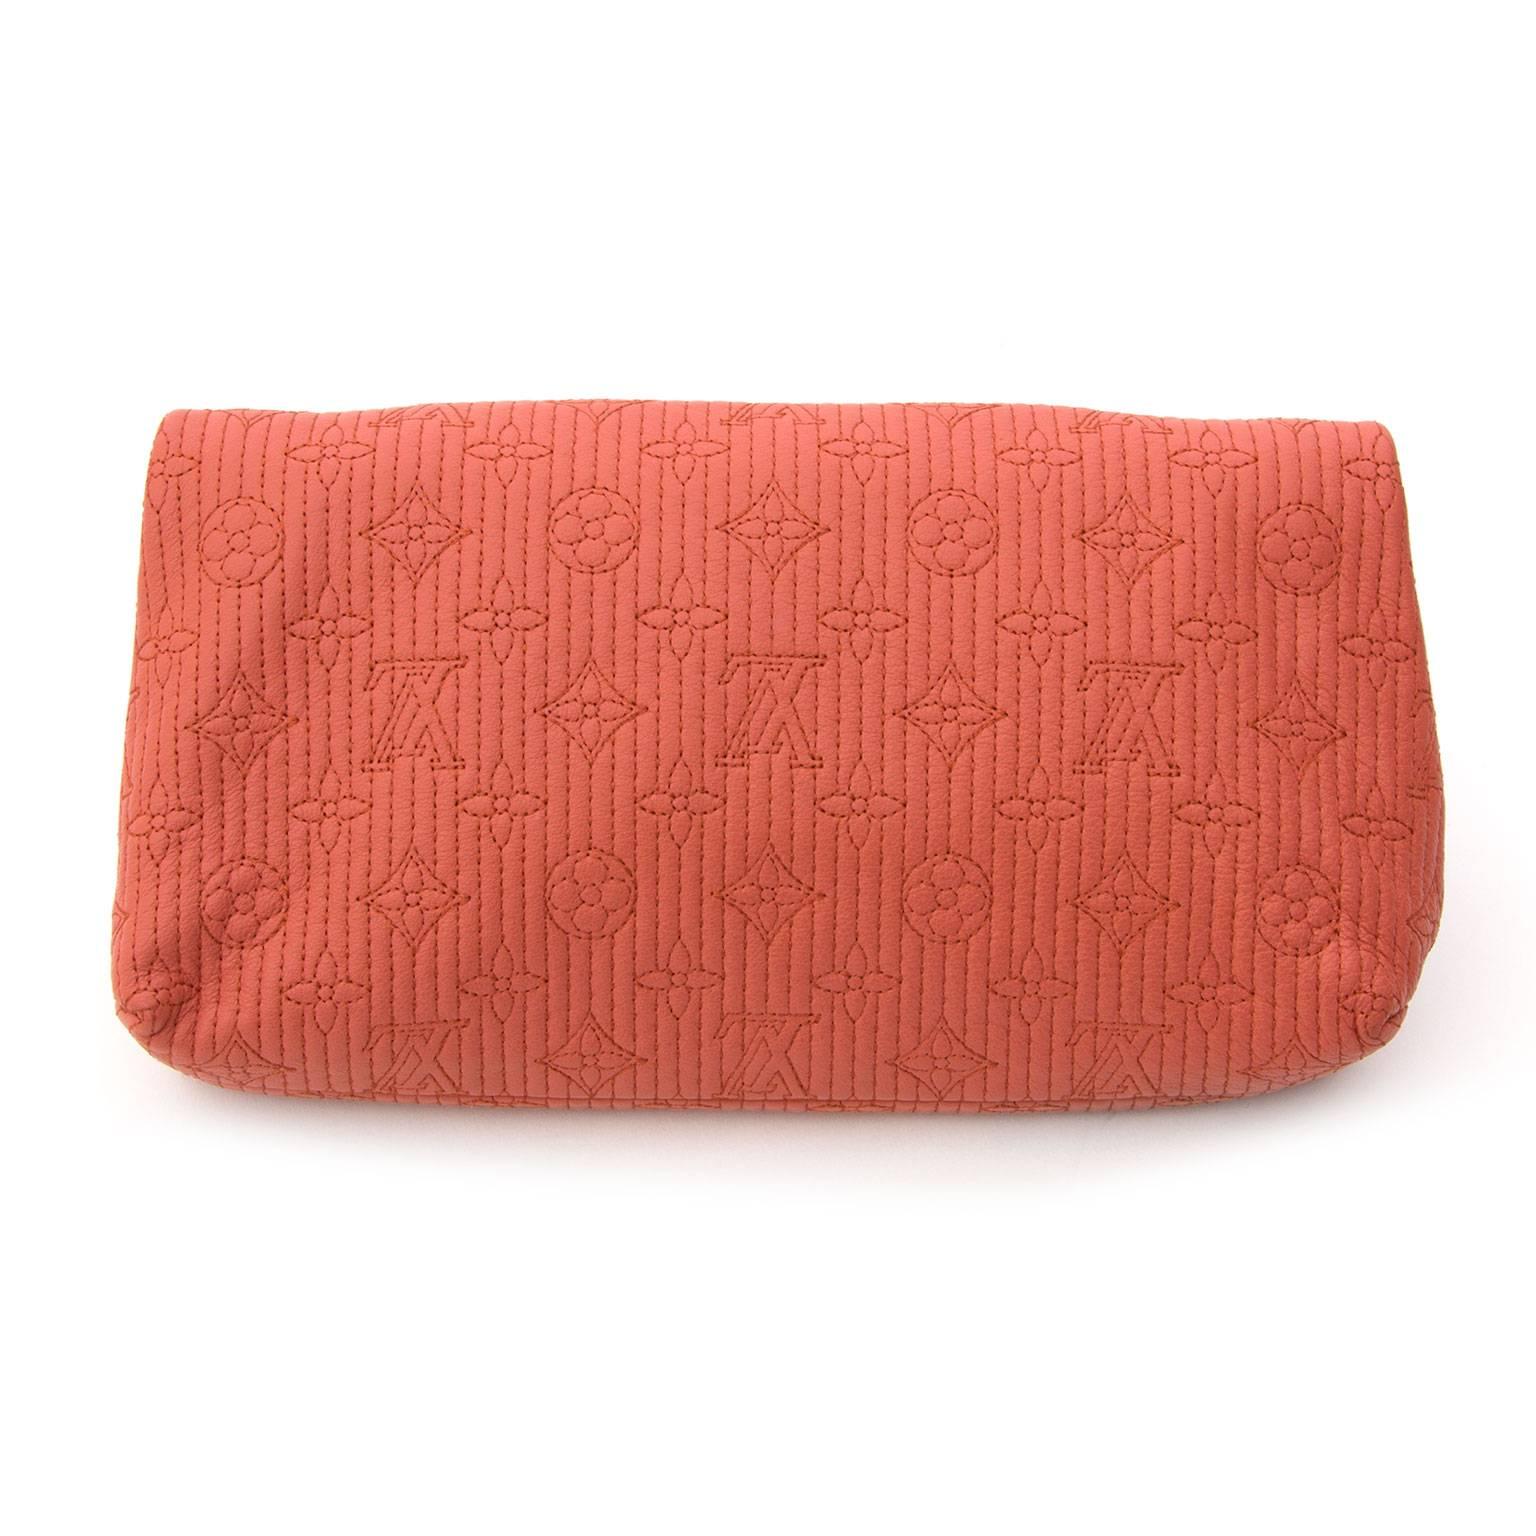 This Louis Vuitton clutch is the perfect accessory for any occasion or outfit.
This stunning clutch is crafted of Louis Vuitton monogram embossed calfskin jacquard weave fabric in matte Coral.
Golden brass metallic hardware pieces with tortoise